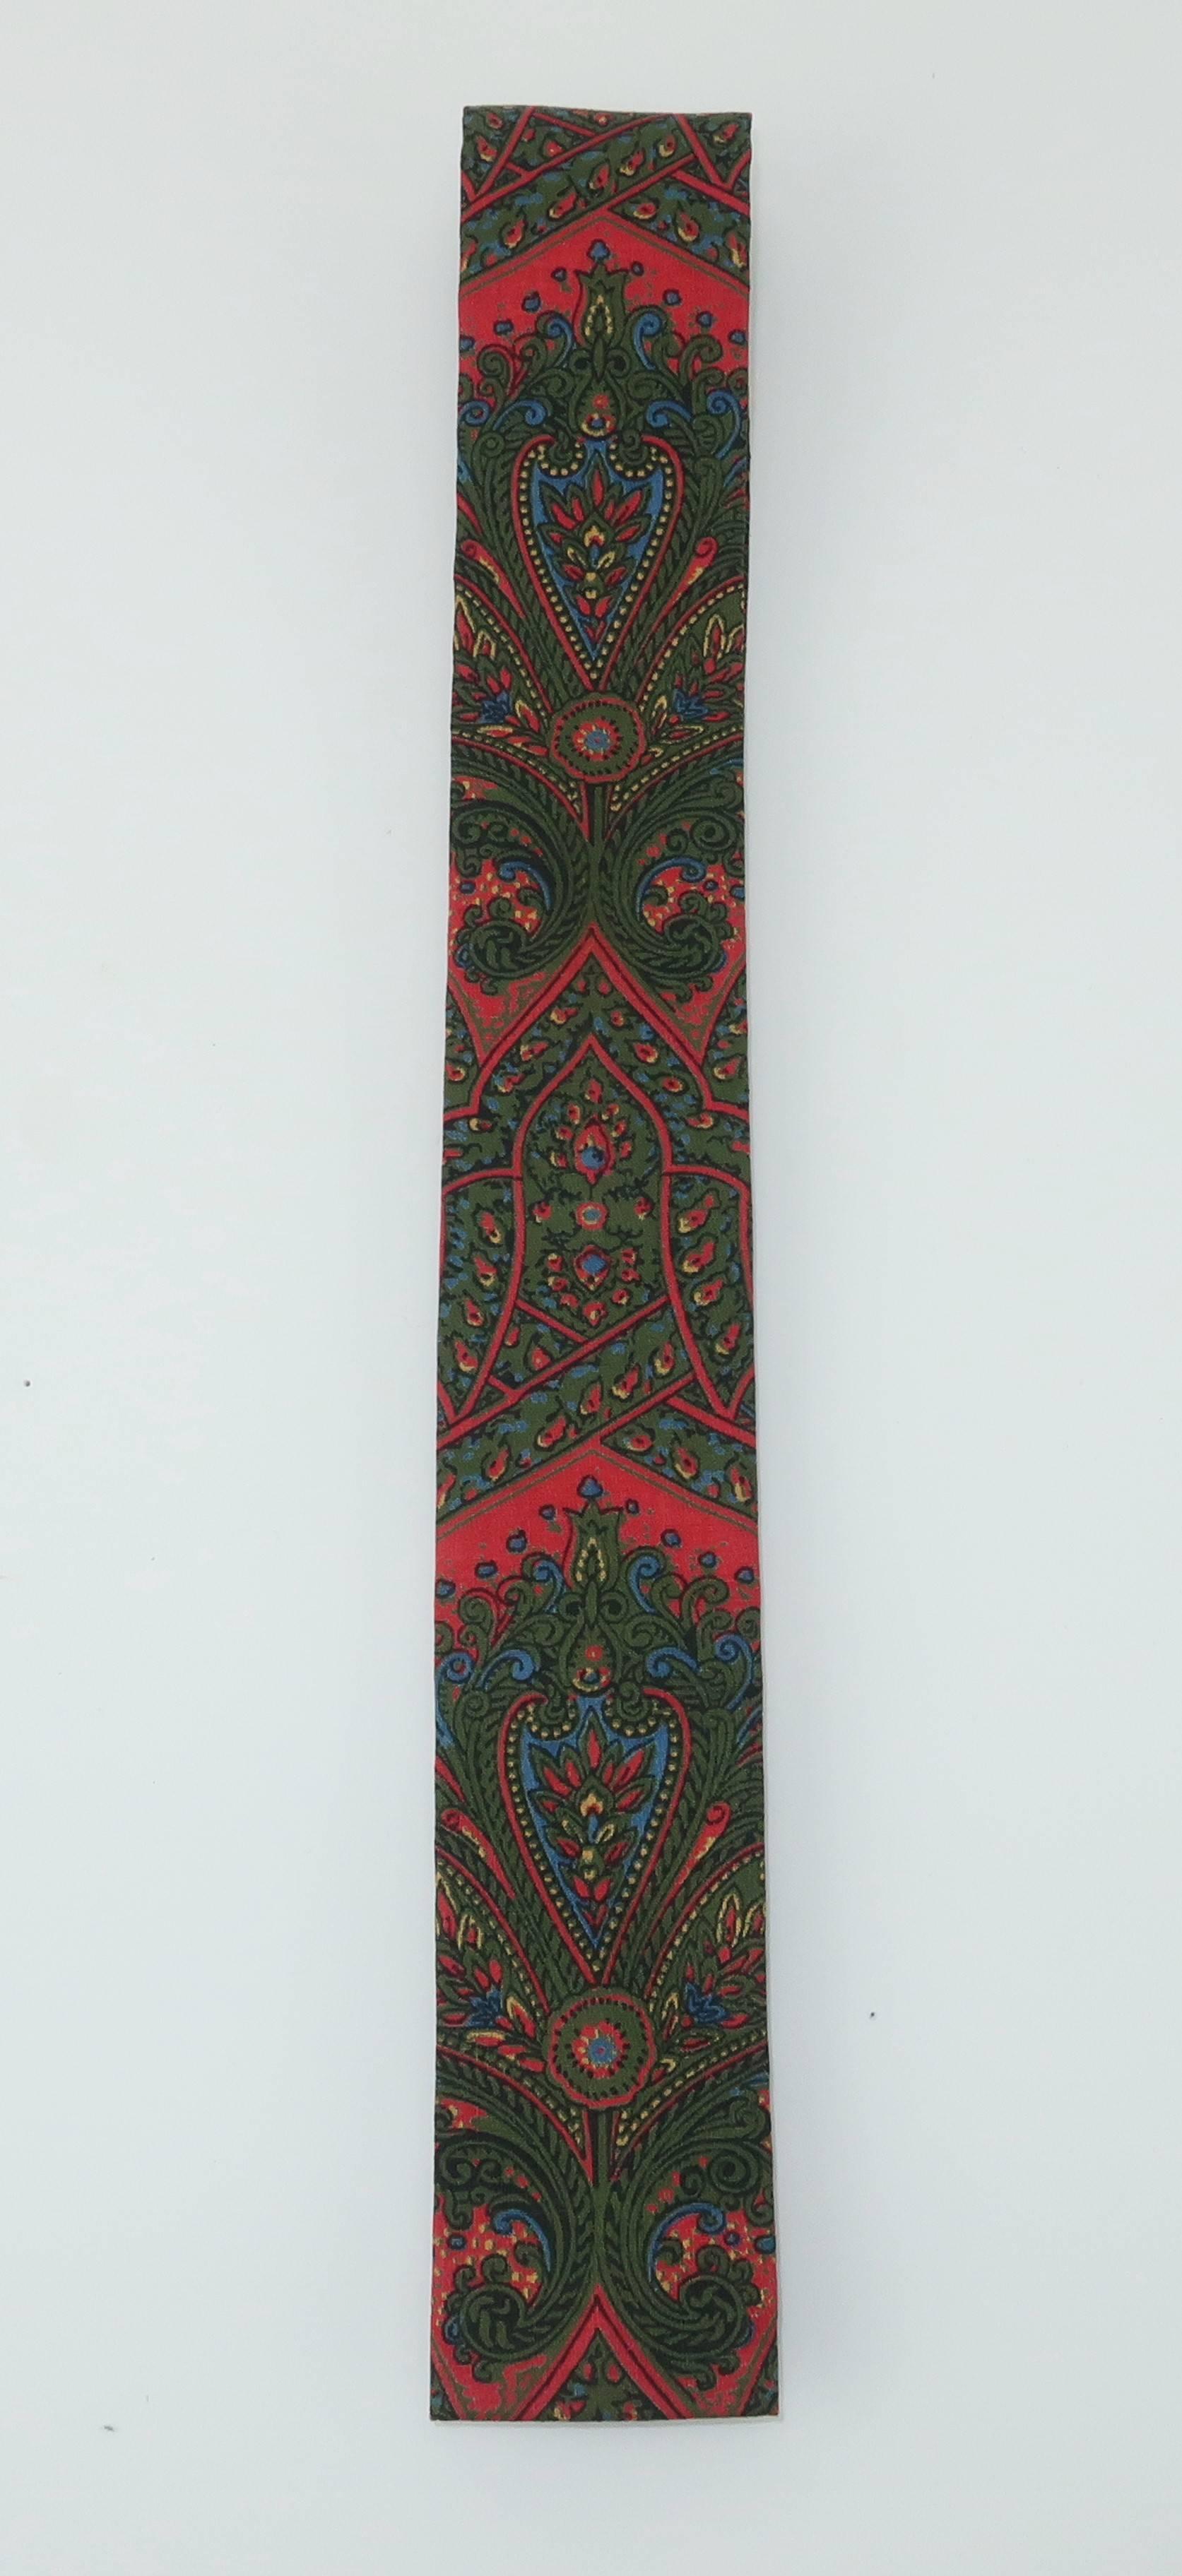 The novelty necktie can be the perfect accessory for a gentleman with both a sense of humor and style.  This 1960's skinny square tie is by Taylor, Ludlow Vermont.  It is fabricated from a cotton blend paisley fabric incorporating a dark orangey